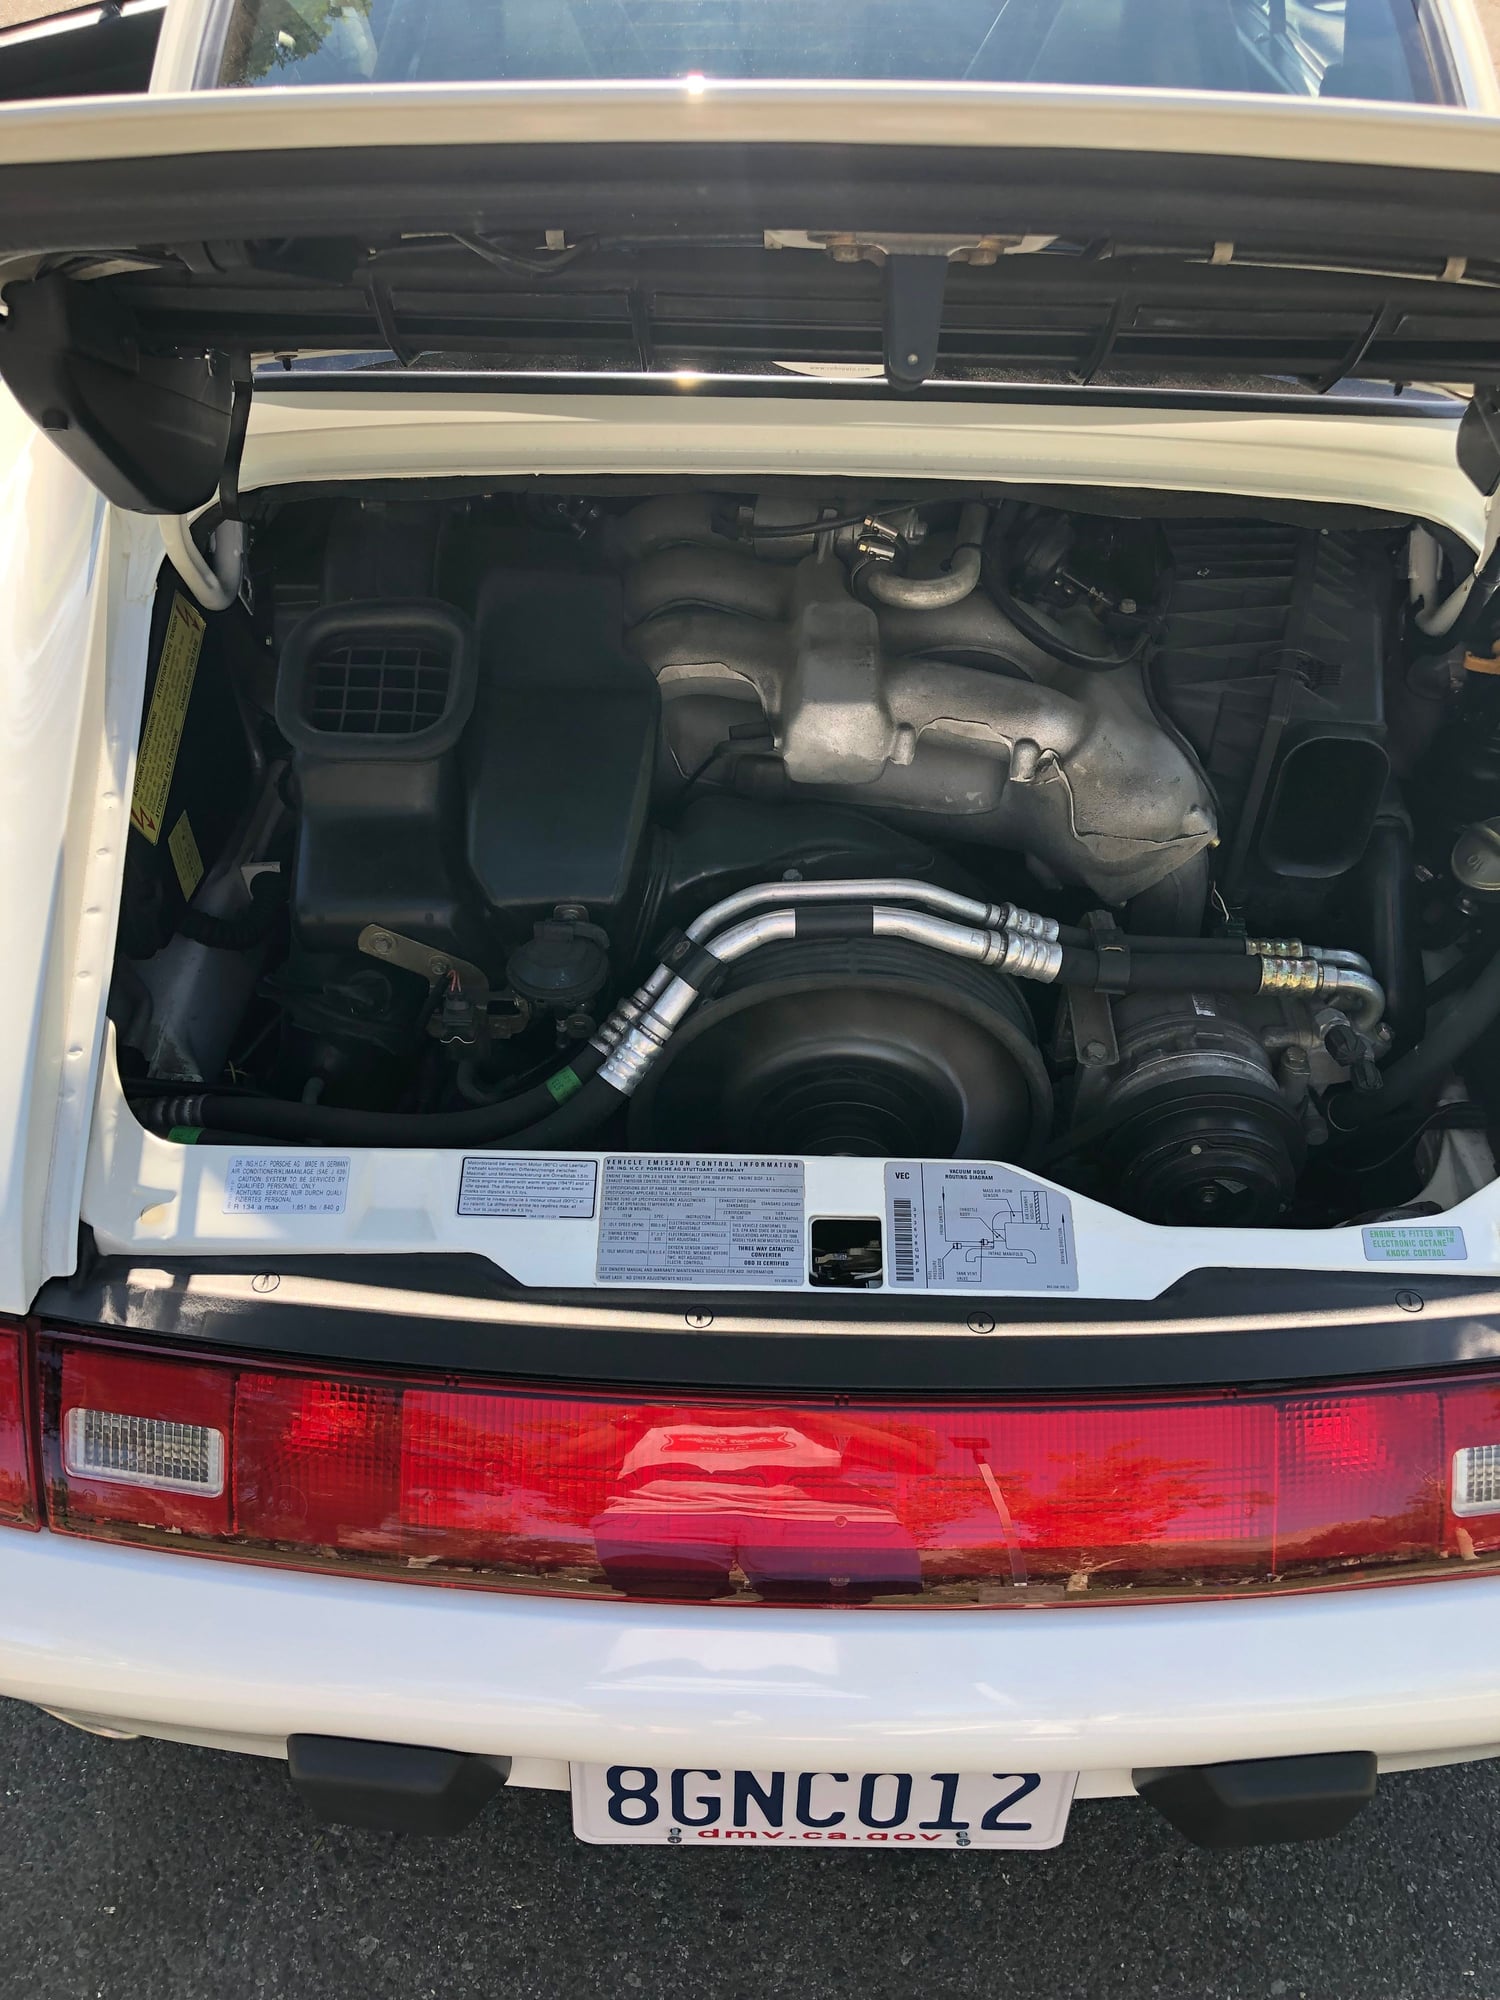 1996 Porsche 911 - 1996 Carrera 6 spd, 51k miles, Sport seats, Limited slip, 18" hollow spoke wheels - Used - VIN wpaa2994ts321871 - 6 cyl - 2WD - Manual - Coupe - White - Palm Springs, CA 92262, United States